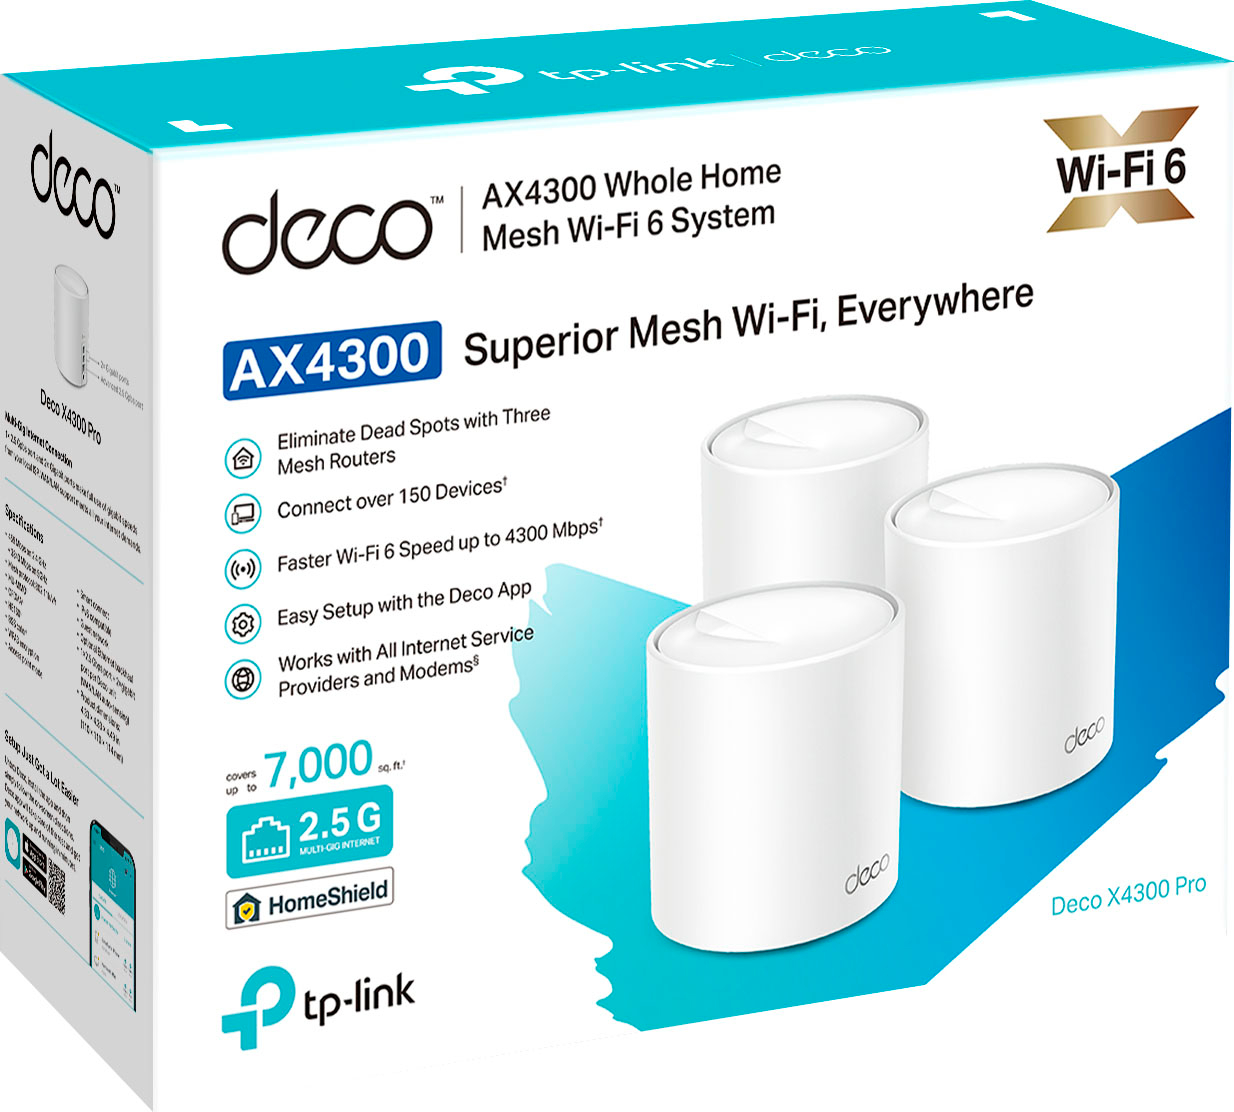 TP-Link DECO X60(2-Pack) Deco Whole Home Mesh WiFi 6 System